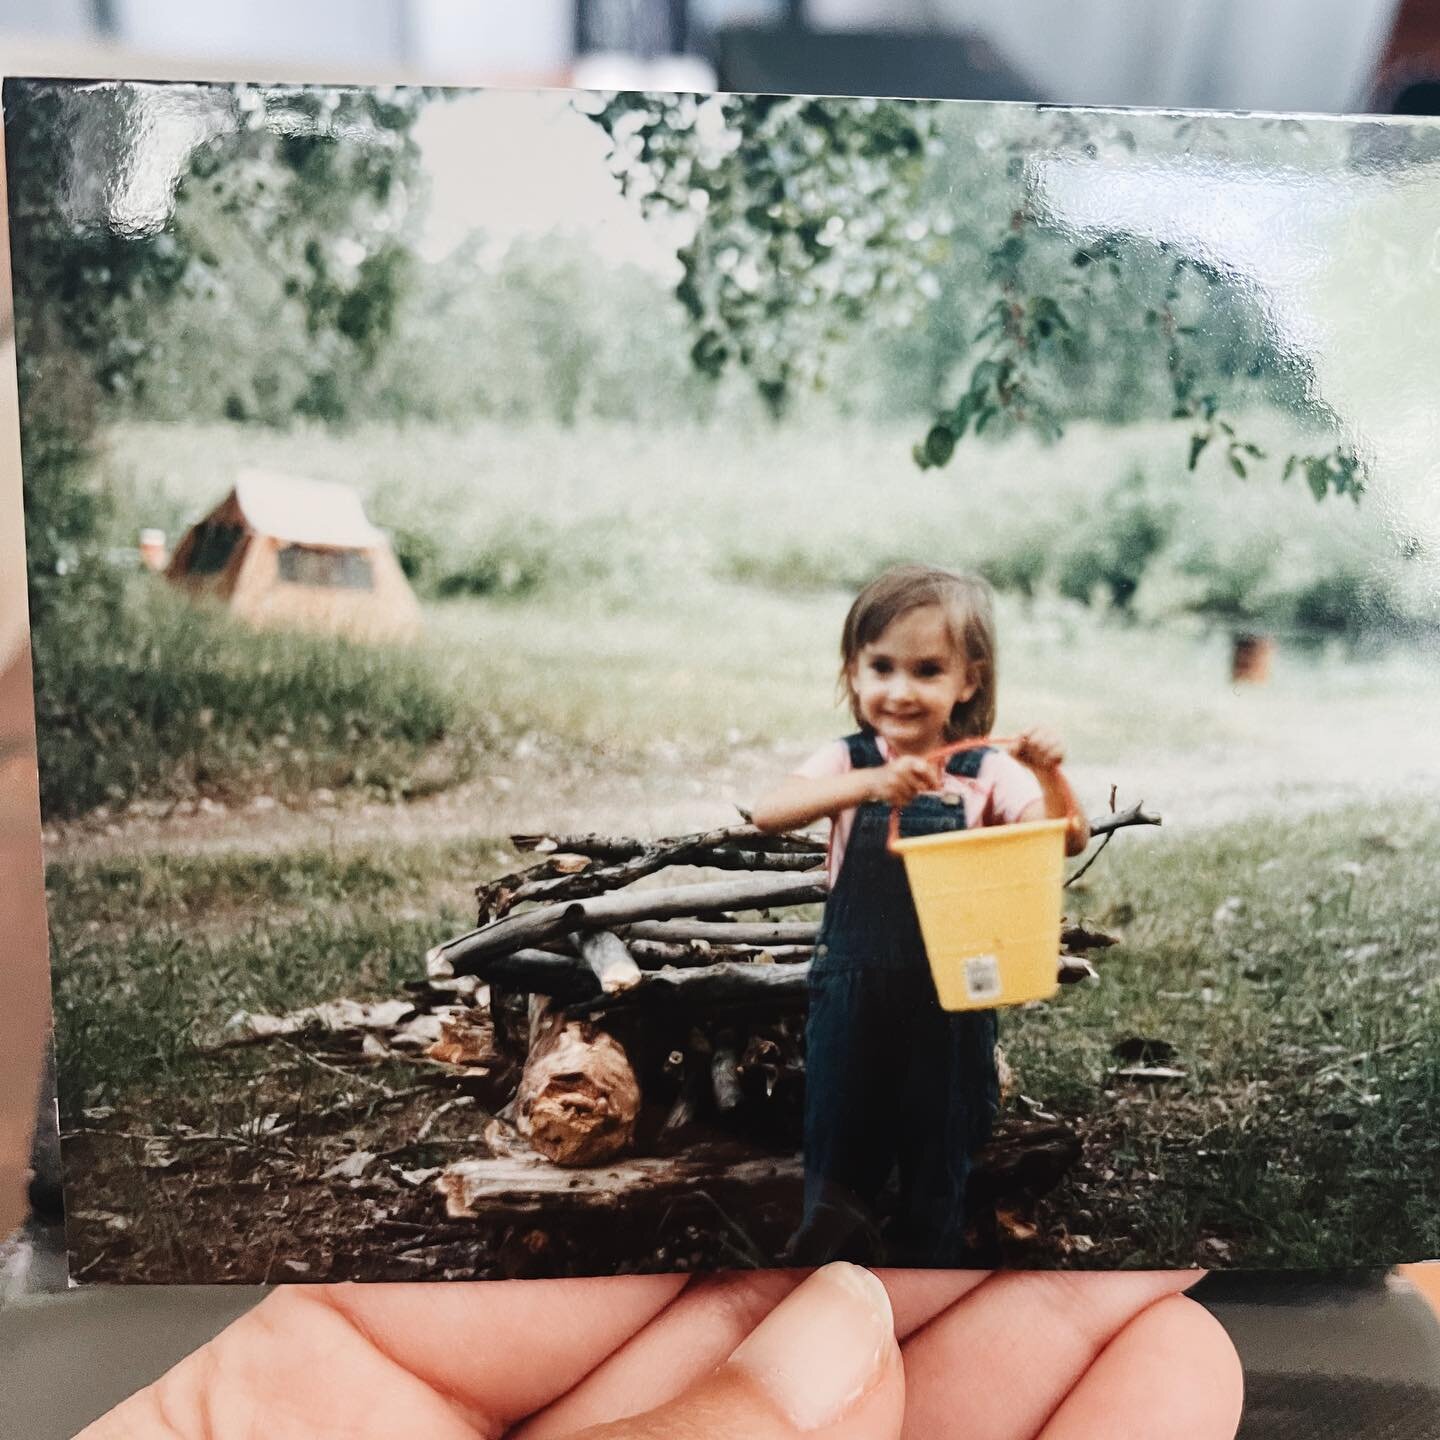 Going through photo albums and see that my love for the outdoors started young. Age 3, camping 🏕 

#throwbacktuesday #camping #1985 #nature